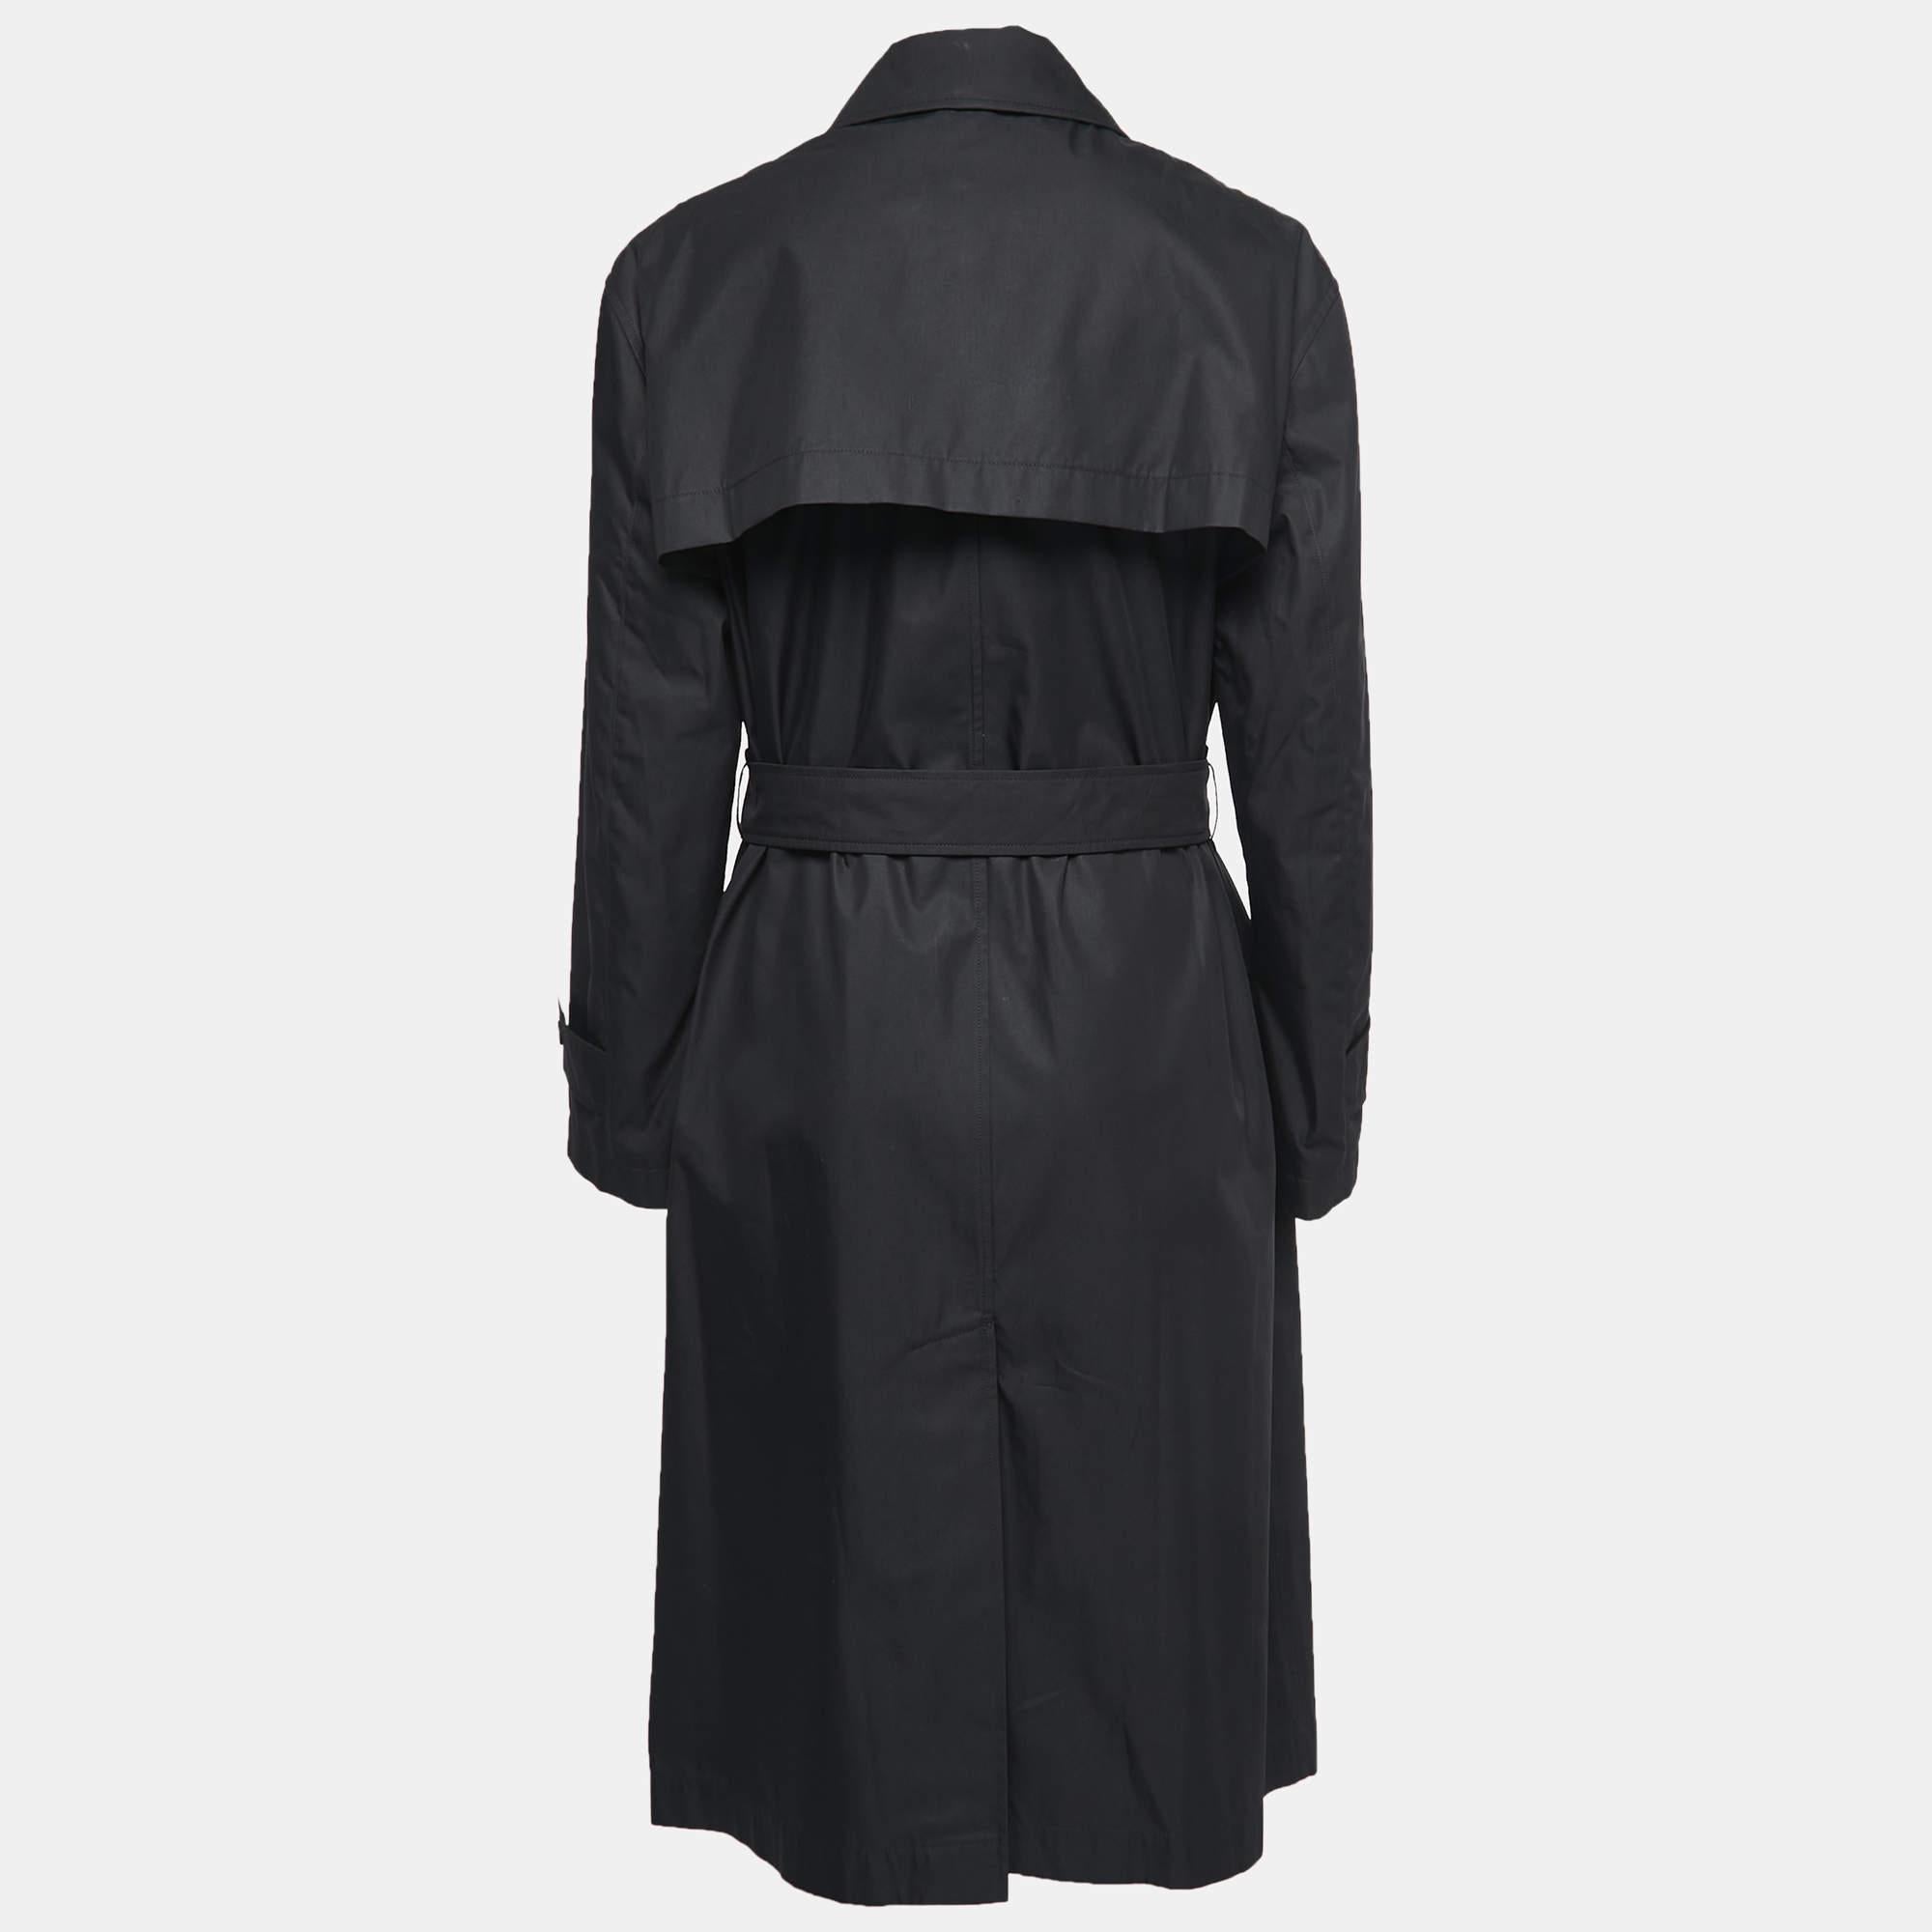 This creation from Burberry is beauty tailored into a coat. It brings a charming black hue to a design that is classic. Made from fine fabric, the coat features a buttoned front, long sleeves, and a belt at the waist to define its shape. The